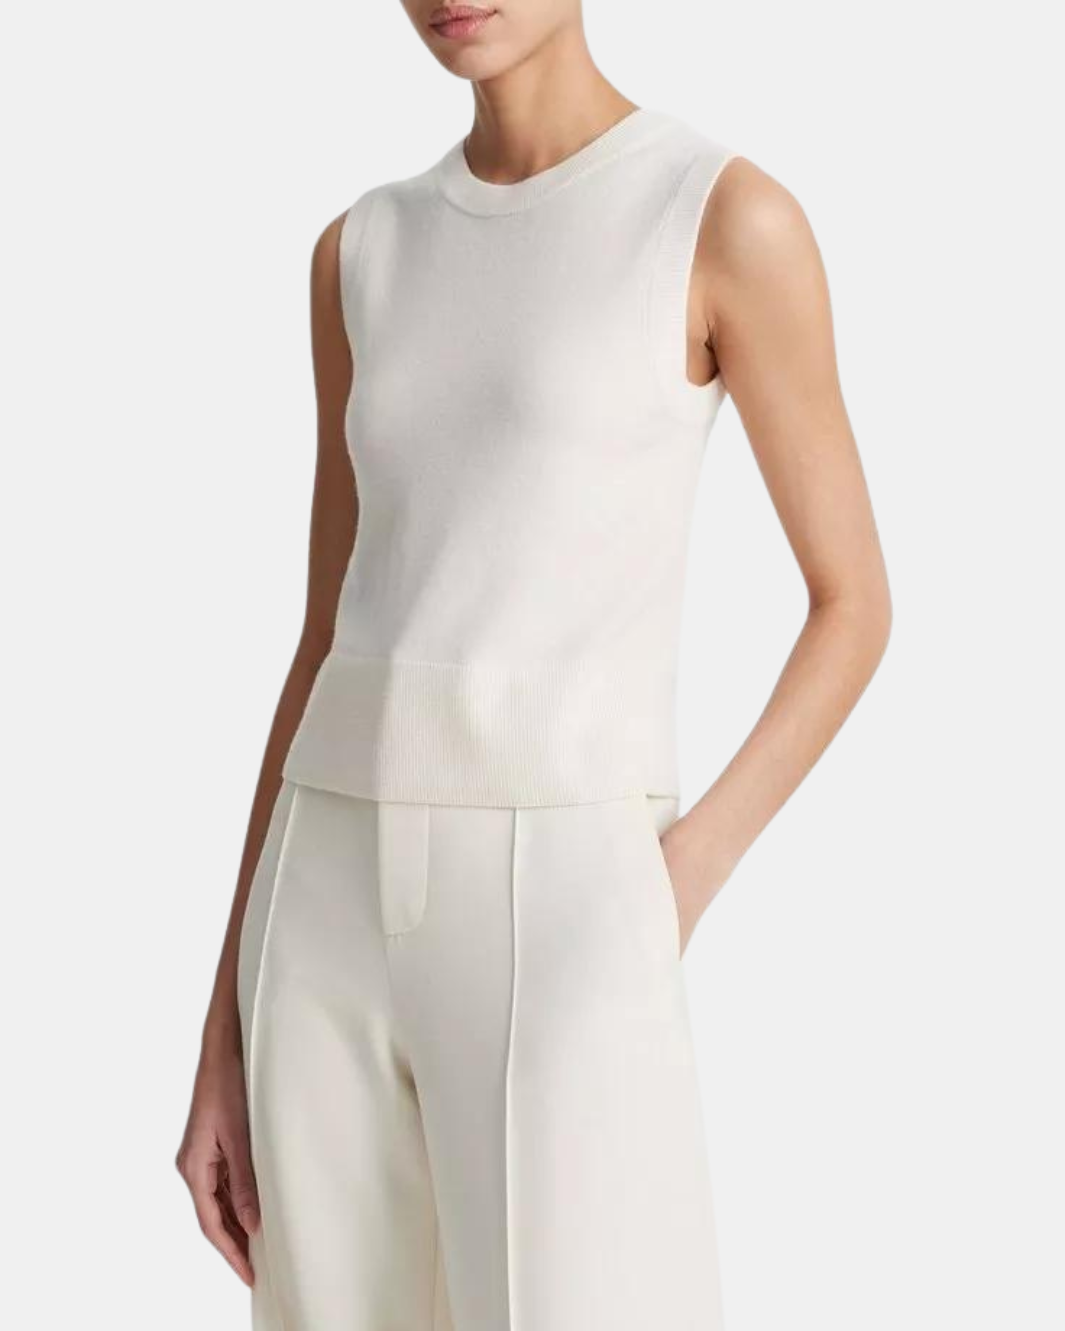 WOOL BLEND CREW NECK SHELL IN OFF WHITE - Romi Boutique